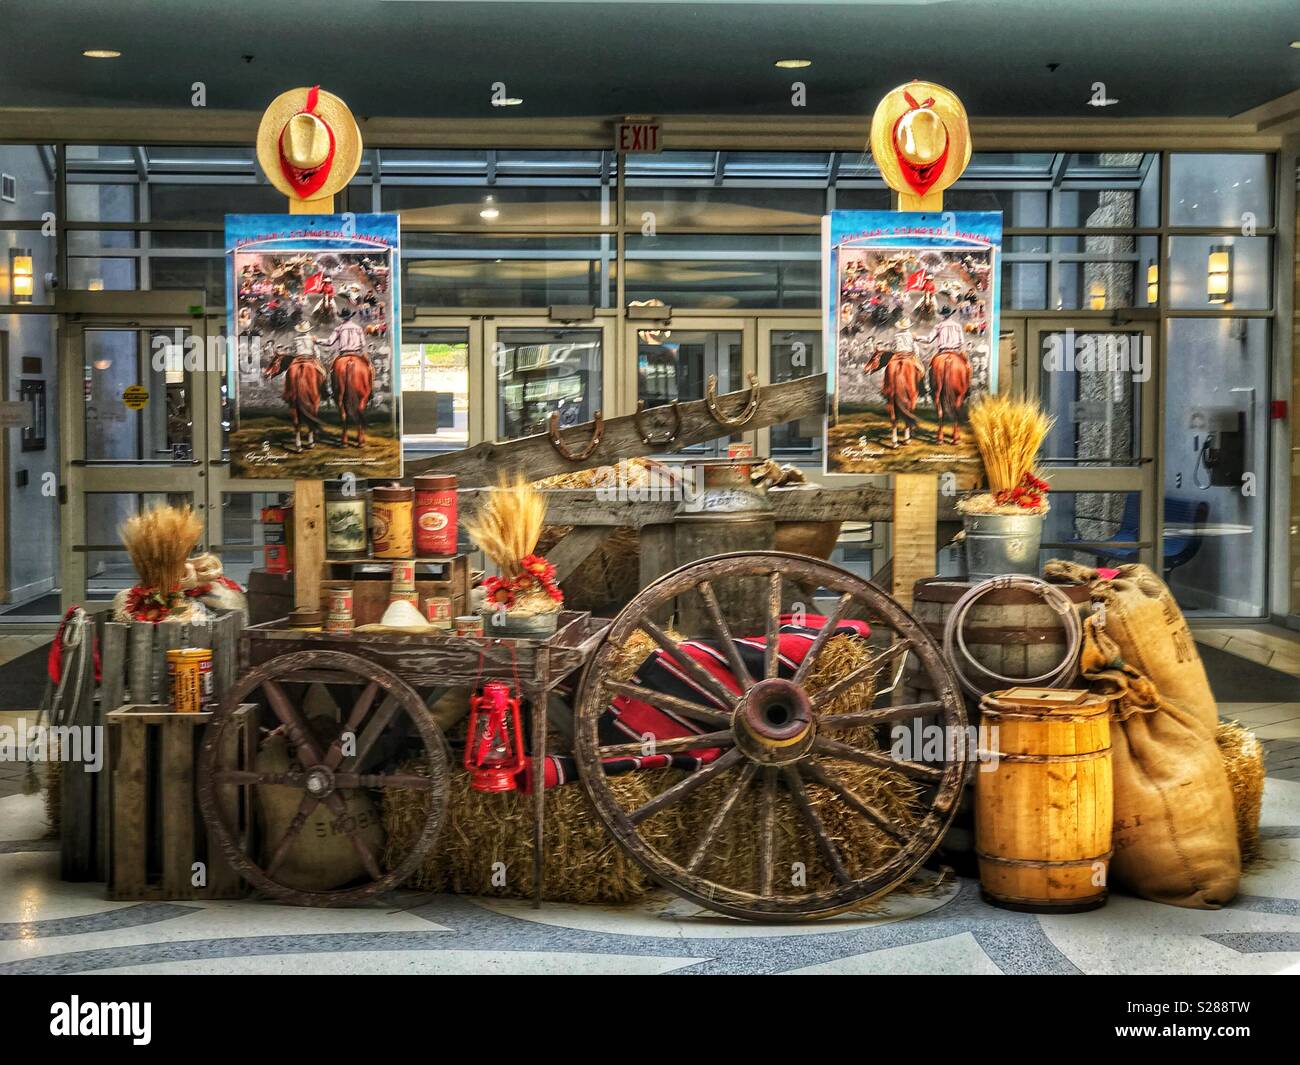 Western display advertising the Calgary Stampede, in a shopping mall in Calgary, Alberta, Canada. Stock Photo